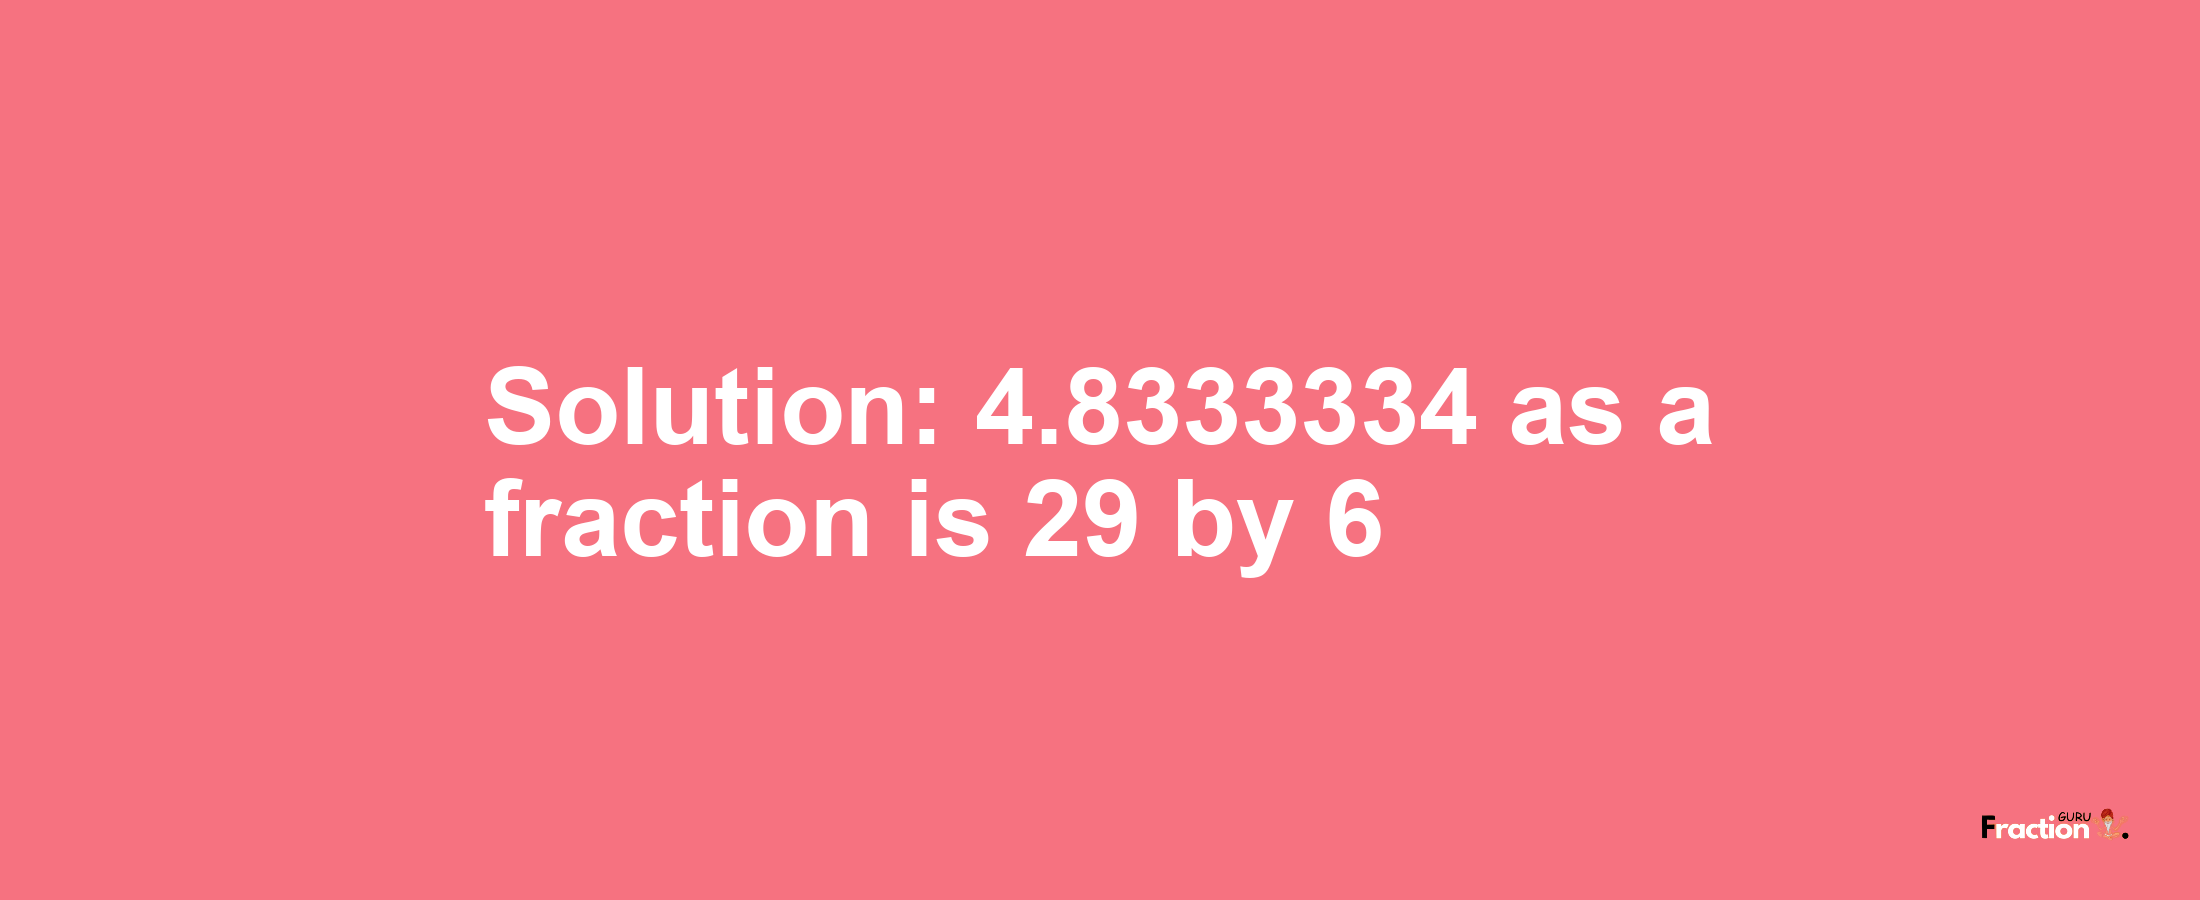 Solution:4.8333334 as a fraction is 29/6